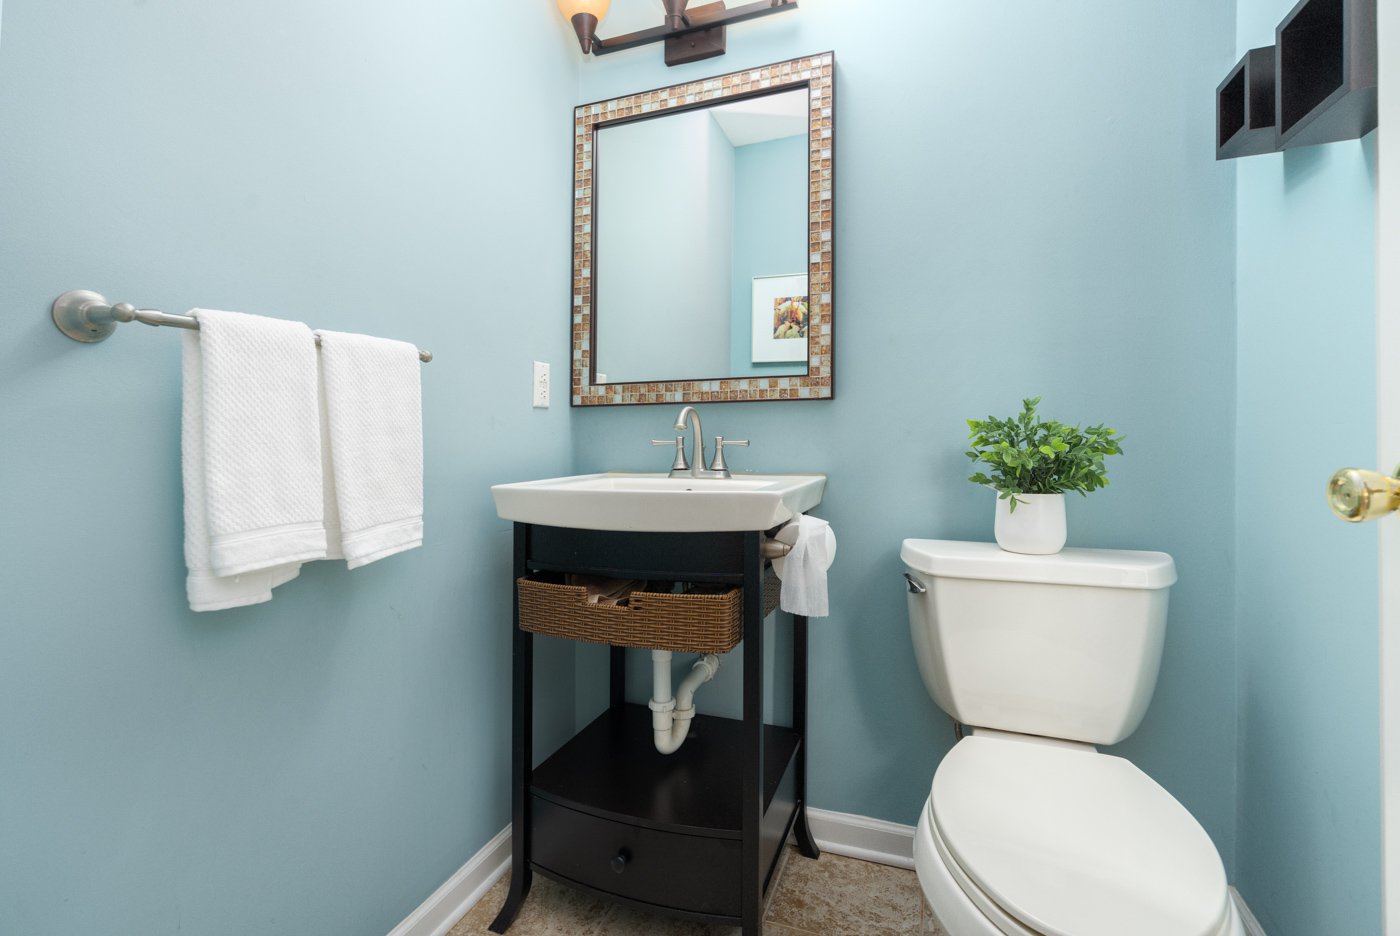 FIRST FLOOW POWDER ROOM 19 Village Green real estate (Low res)-21.jpg